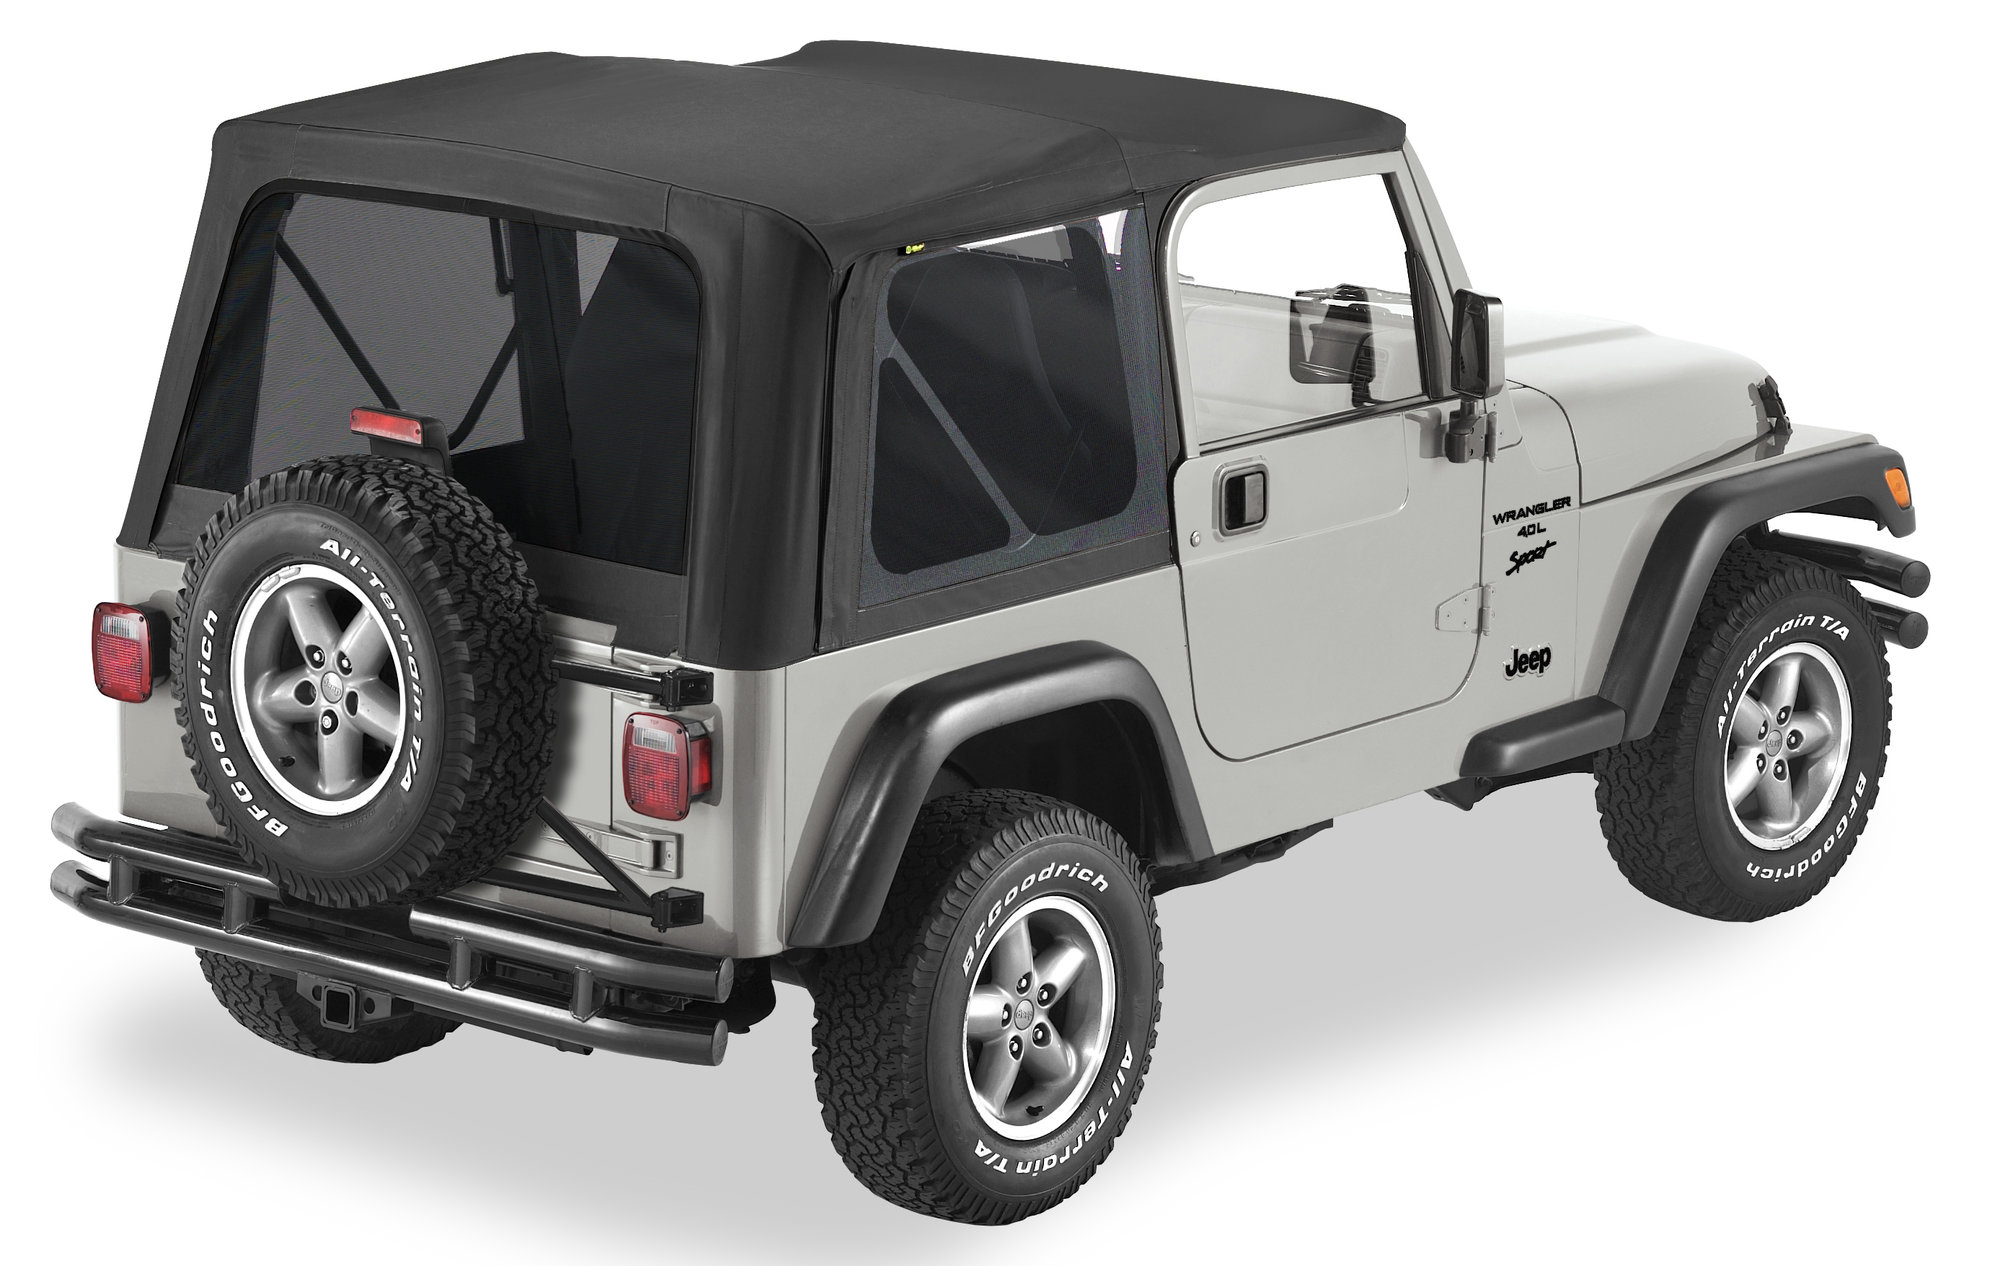 Bestop Replace-a-top with Tinted Windows for 97-06 Jeep Wrangler TJ  Quadratec